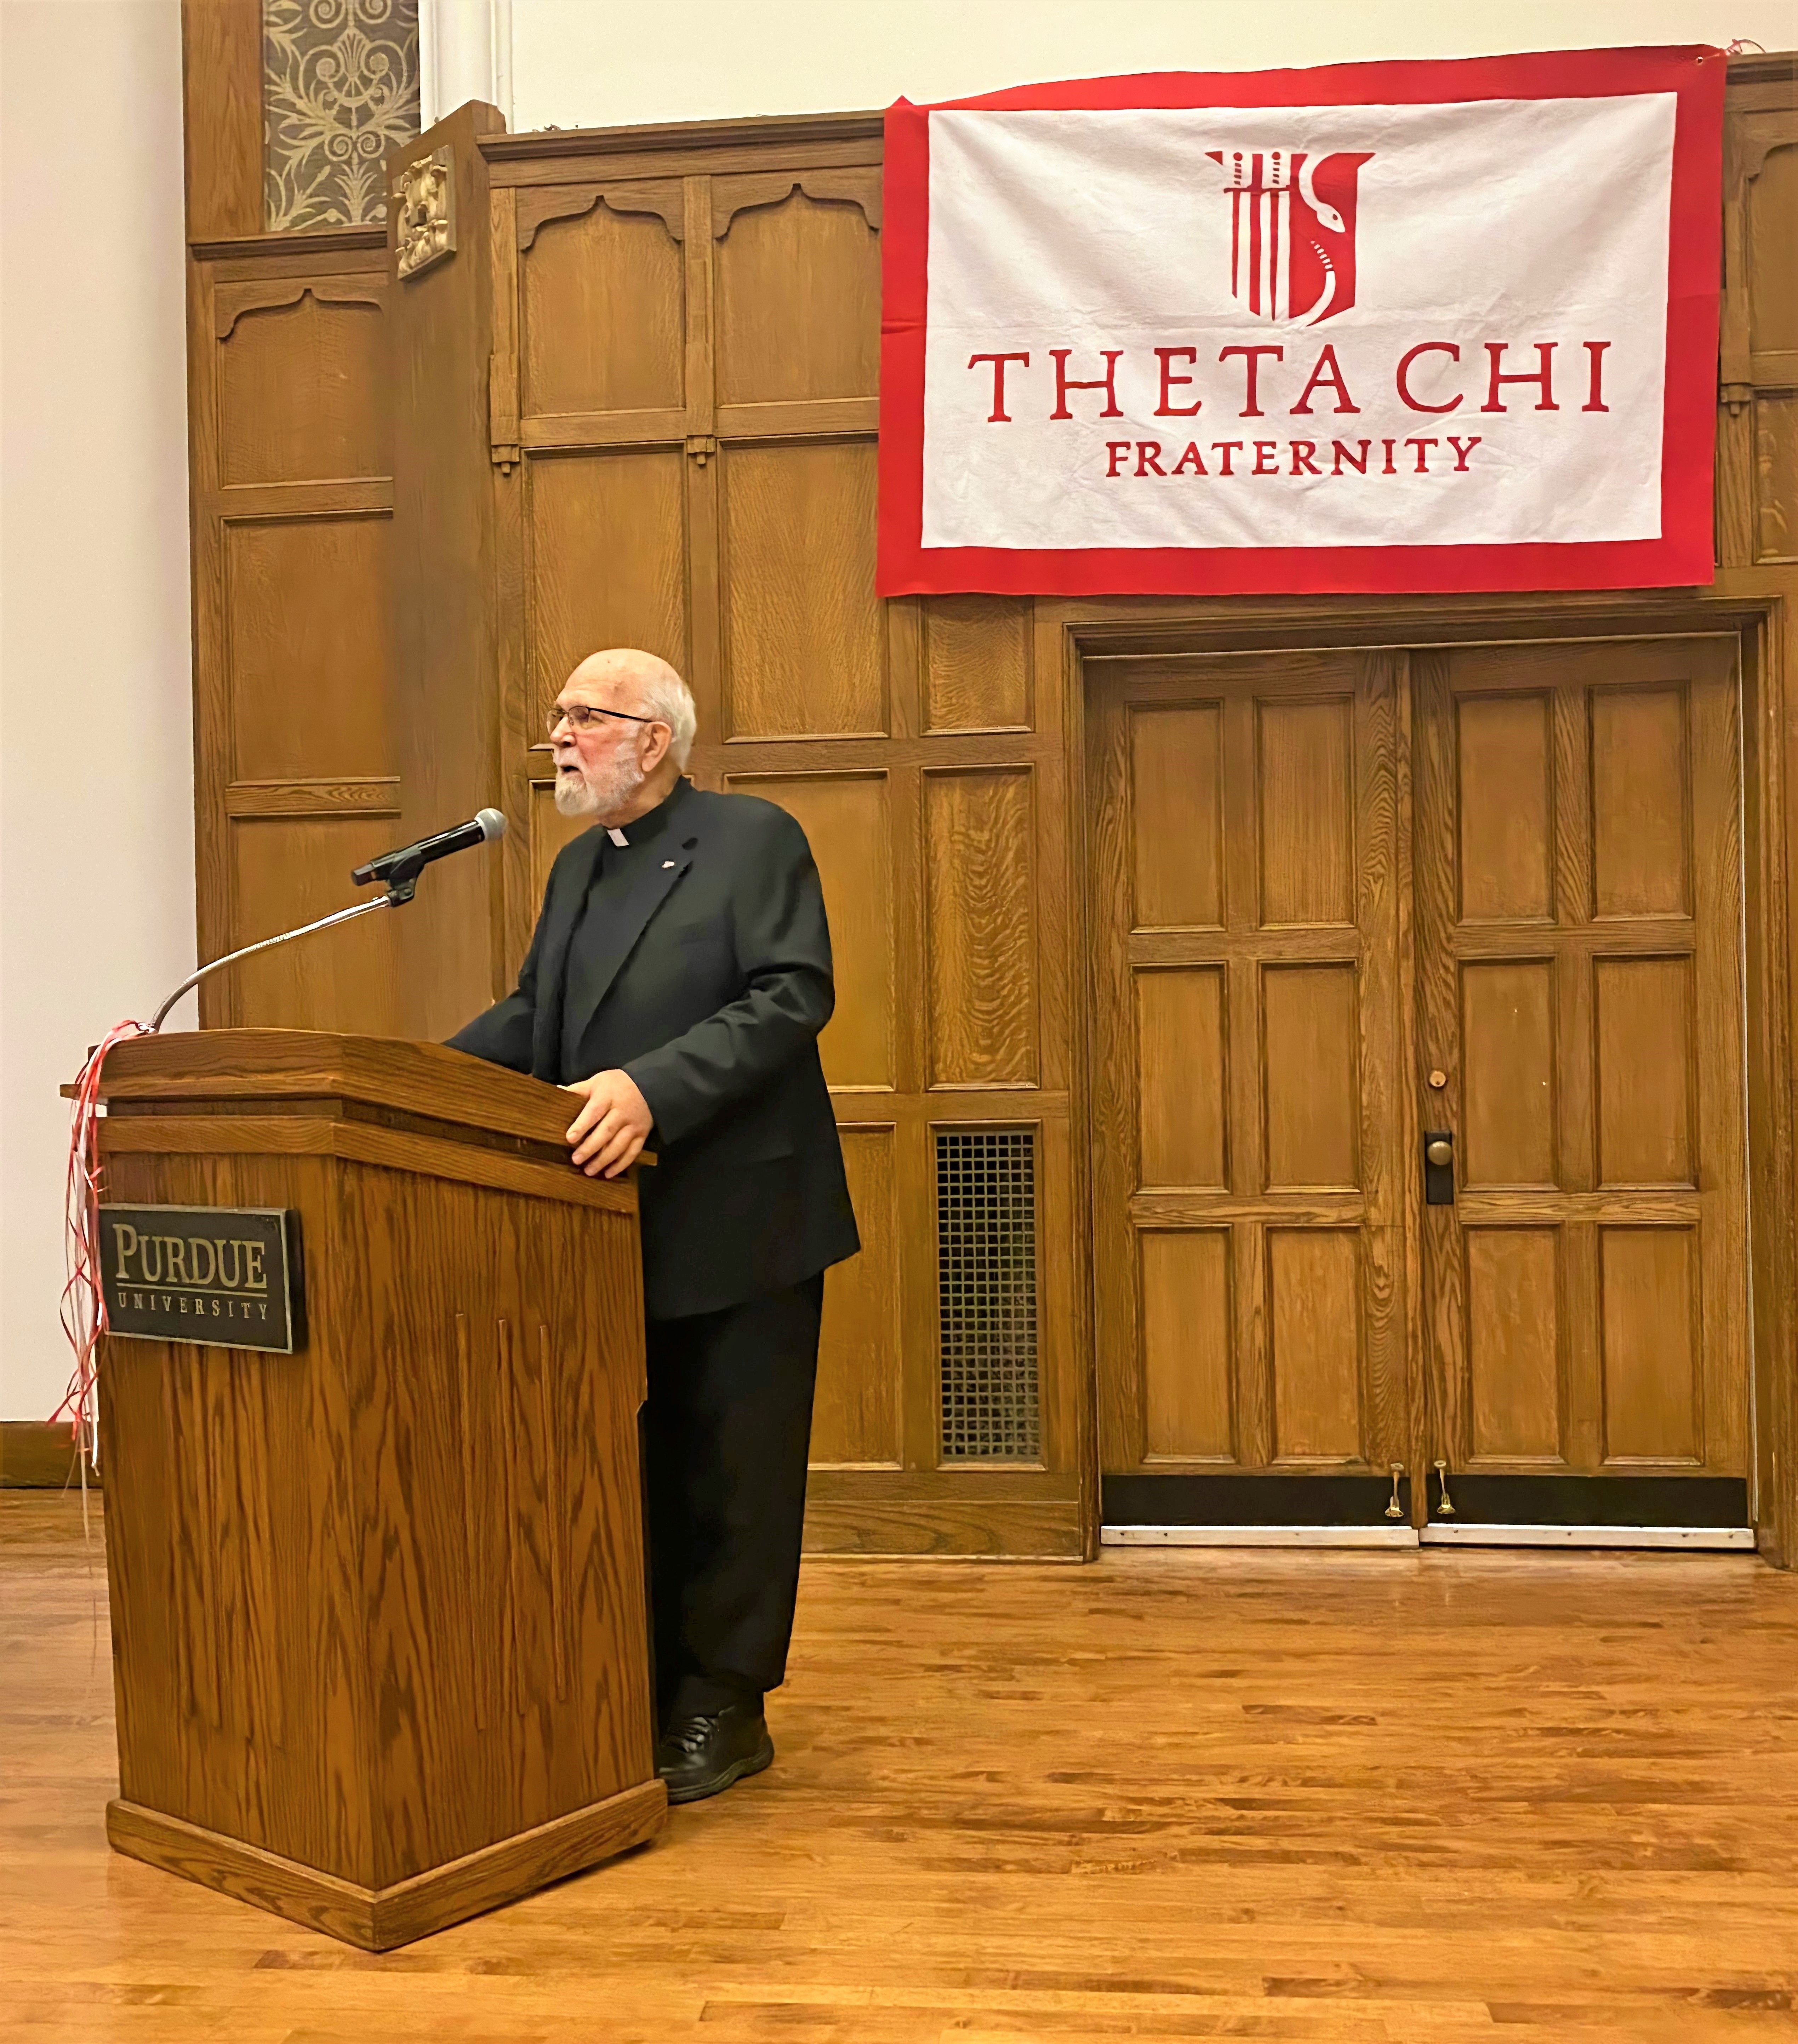 Fr. Phil speaking at a Theta Chi event